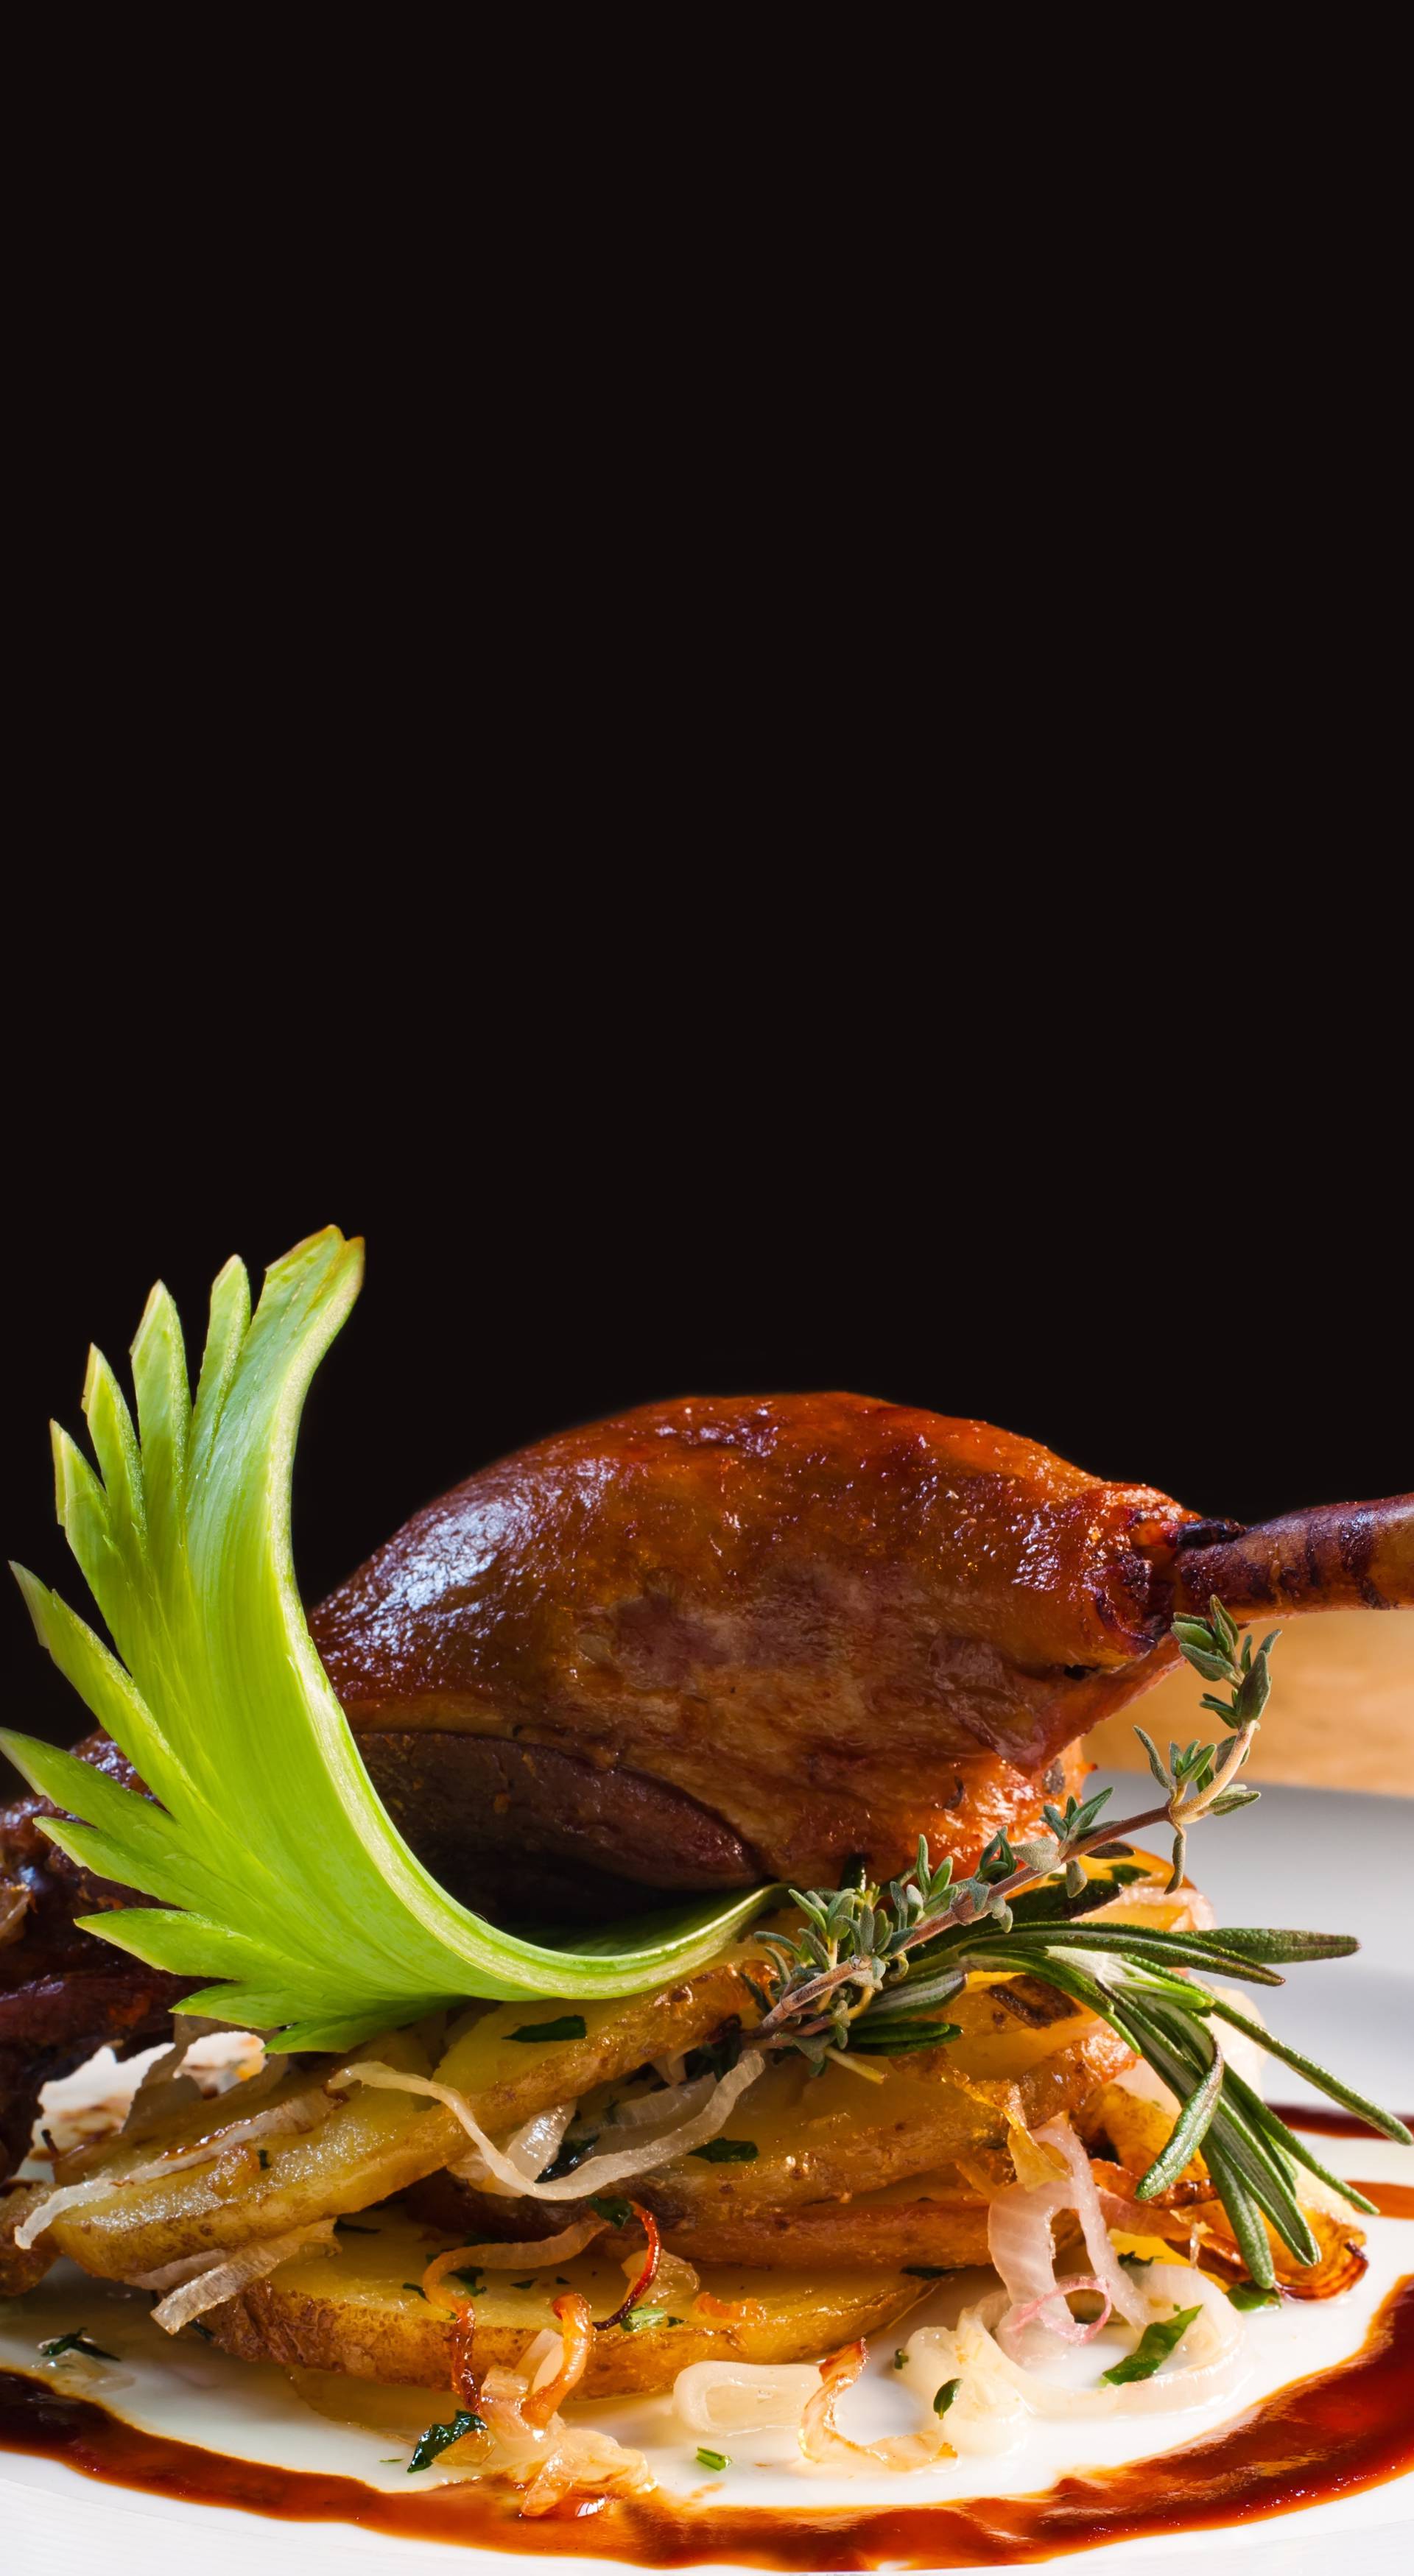 Appetizing duck confit with potato and onions. Baked delicatessen pestle